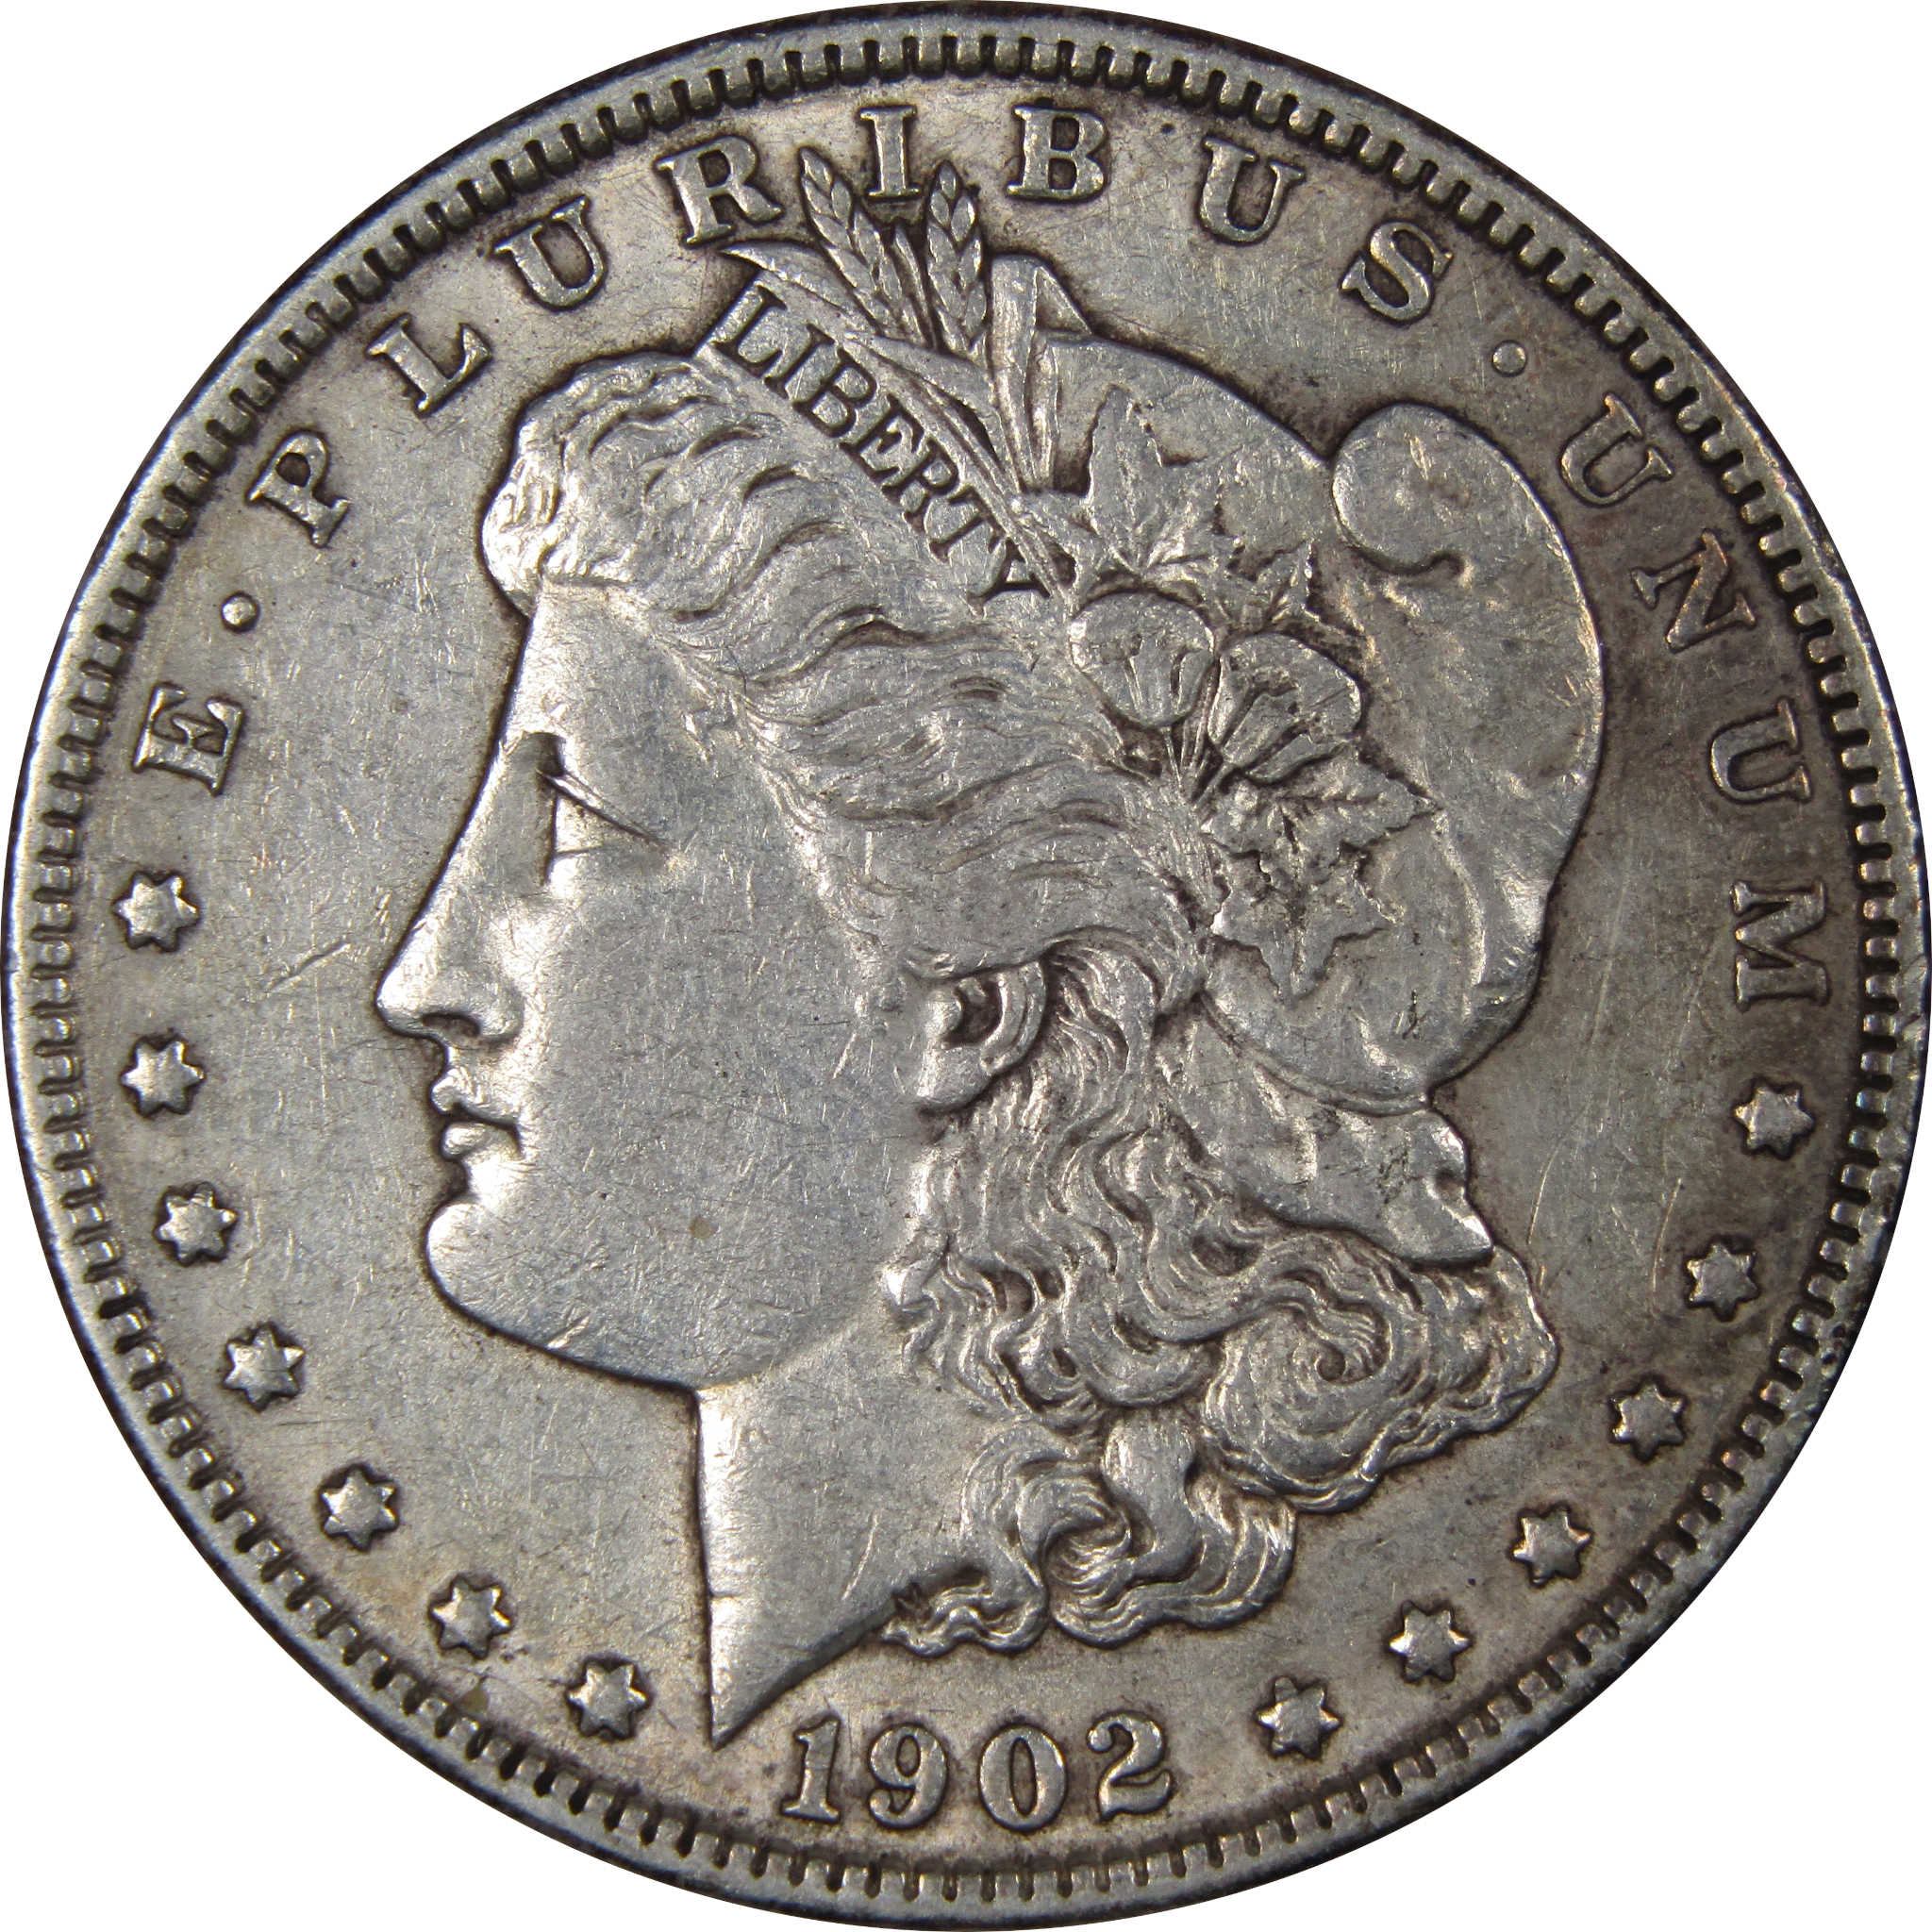 1902 Morgan Dollar XF EF Extremely Fine 90% Silver Coin SKU:IPC7915 - Morgan coin - Morgan silver dollar - Morgan silver dollar for sale - Profile Coins &amp; Collectibles